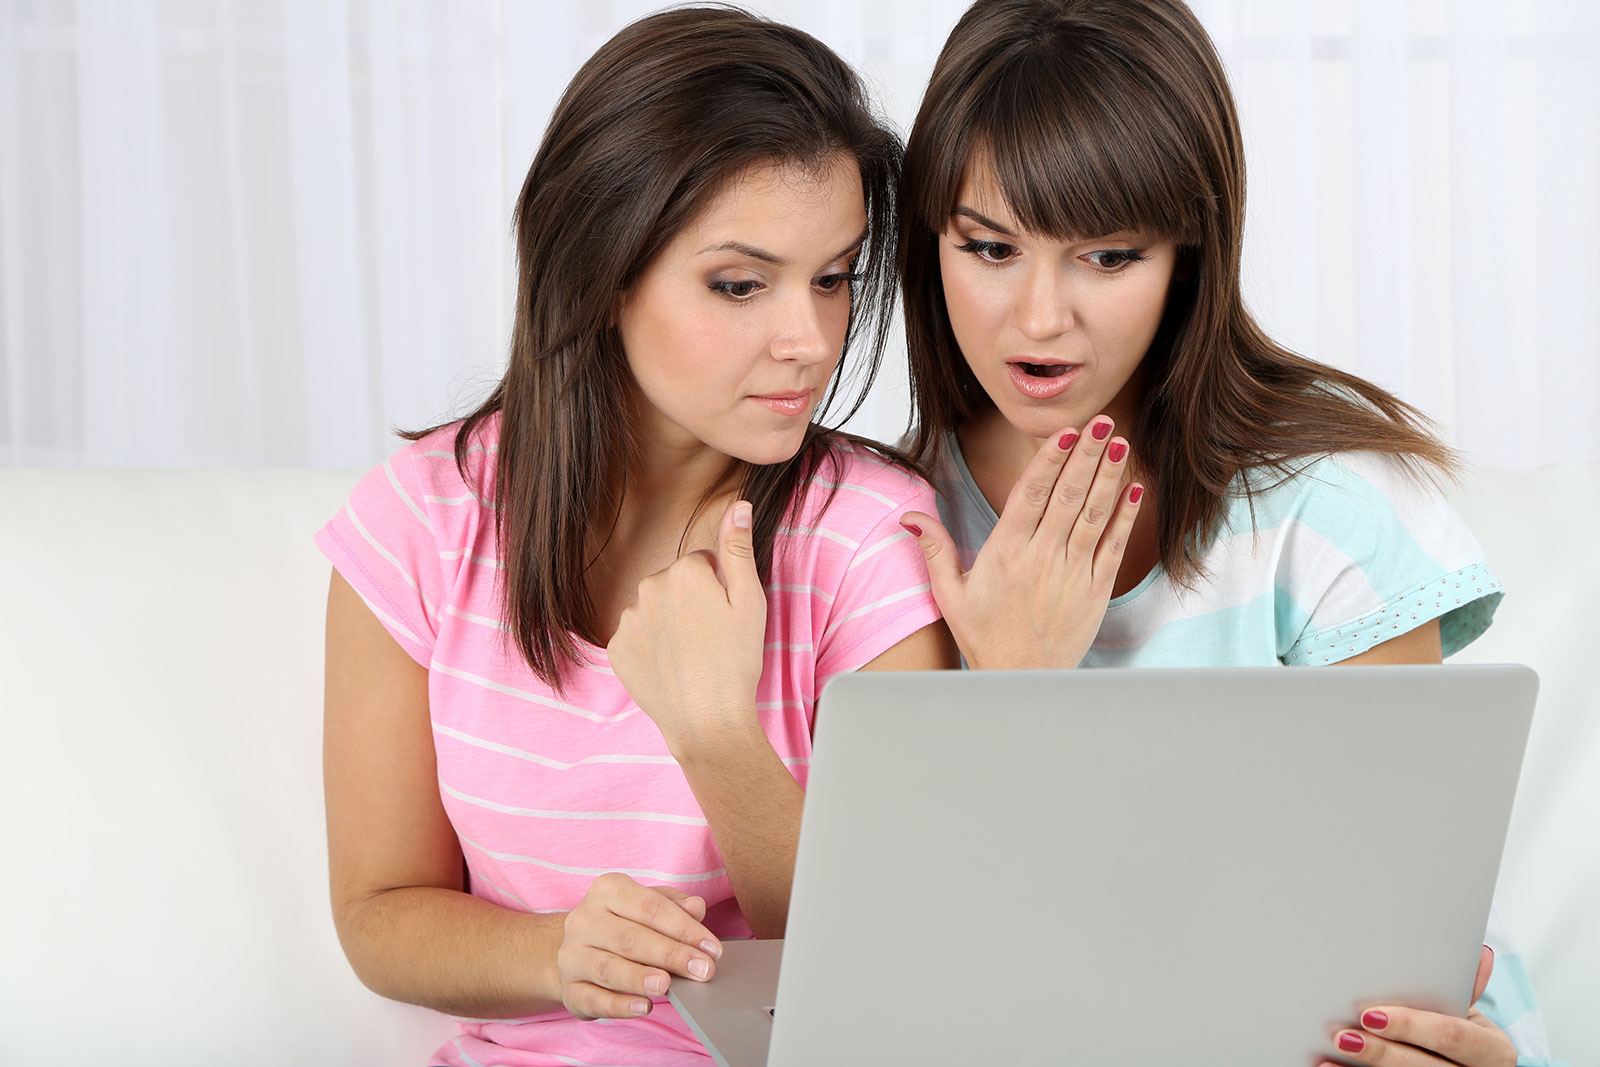 Twin siblings looking upset at a mixed credit file on a computer